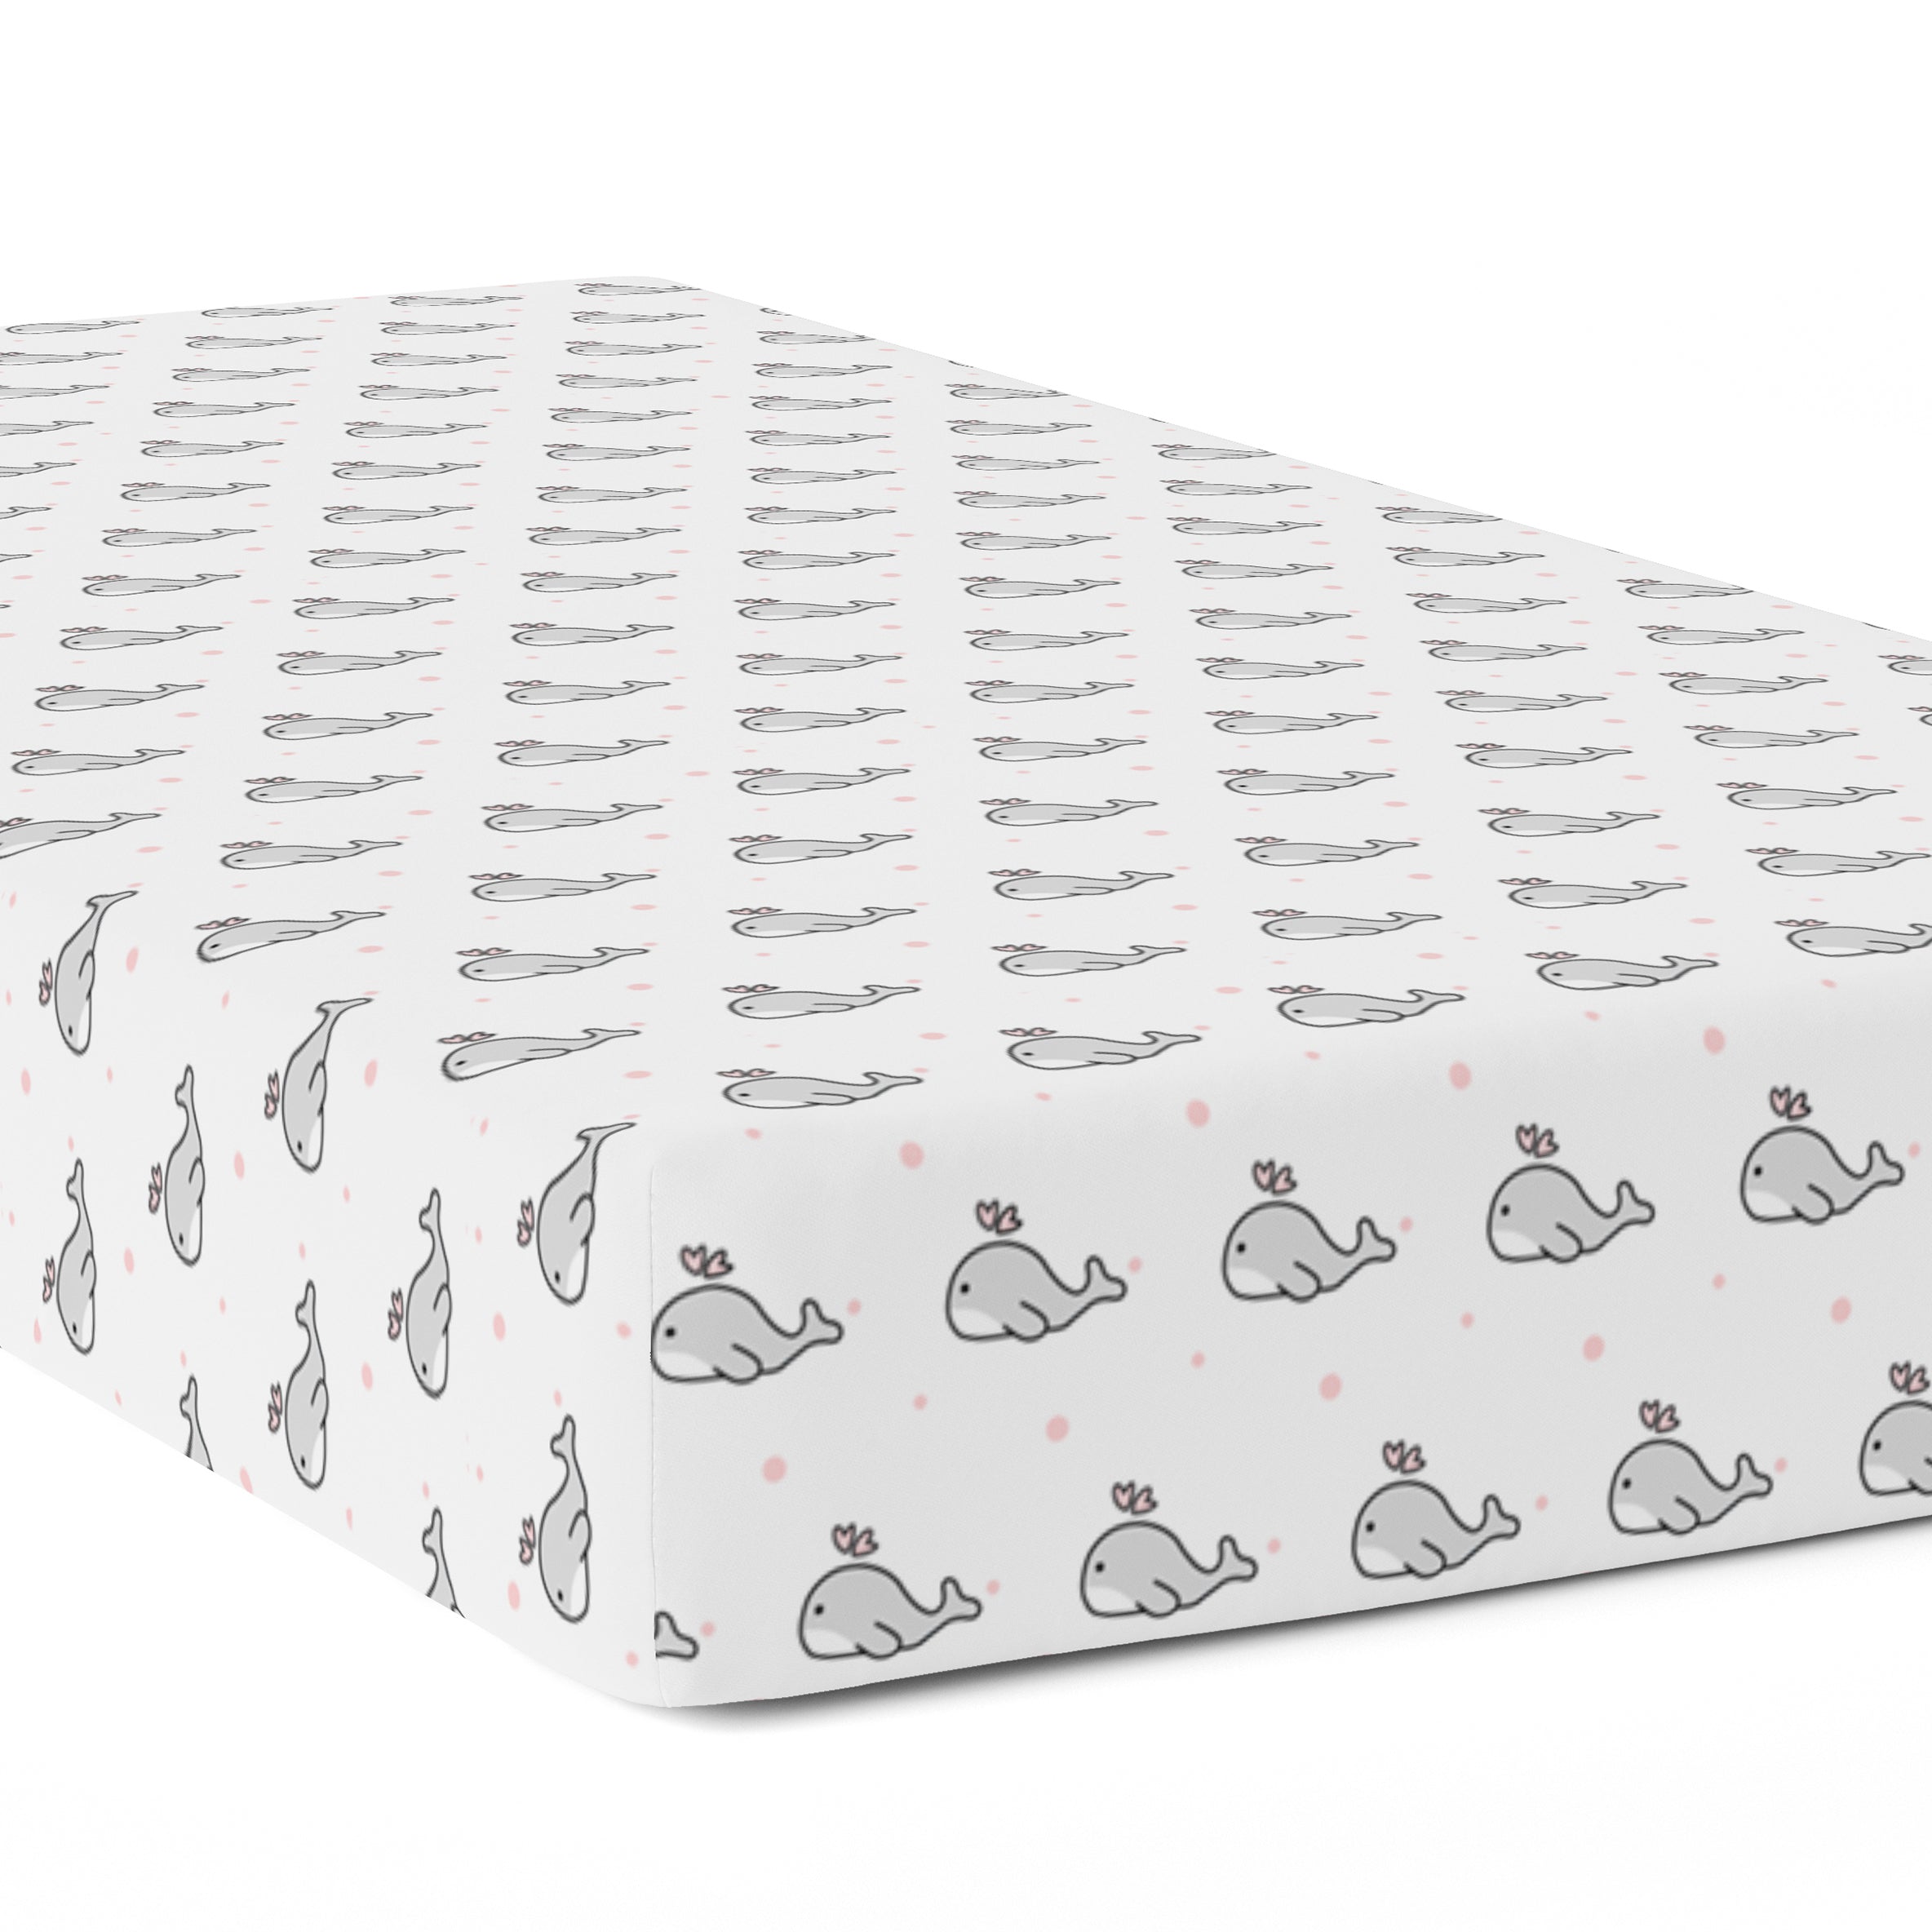 The White Cradle Pure Organic Cotton Fitted Cot Sheet for Baby Crib 28 x 52 inch - Grey Whale with Pink Dots (Large)